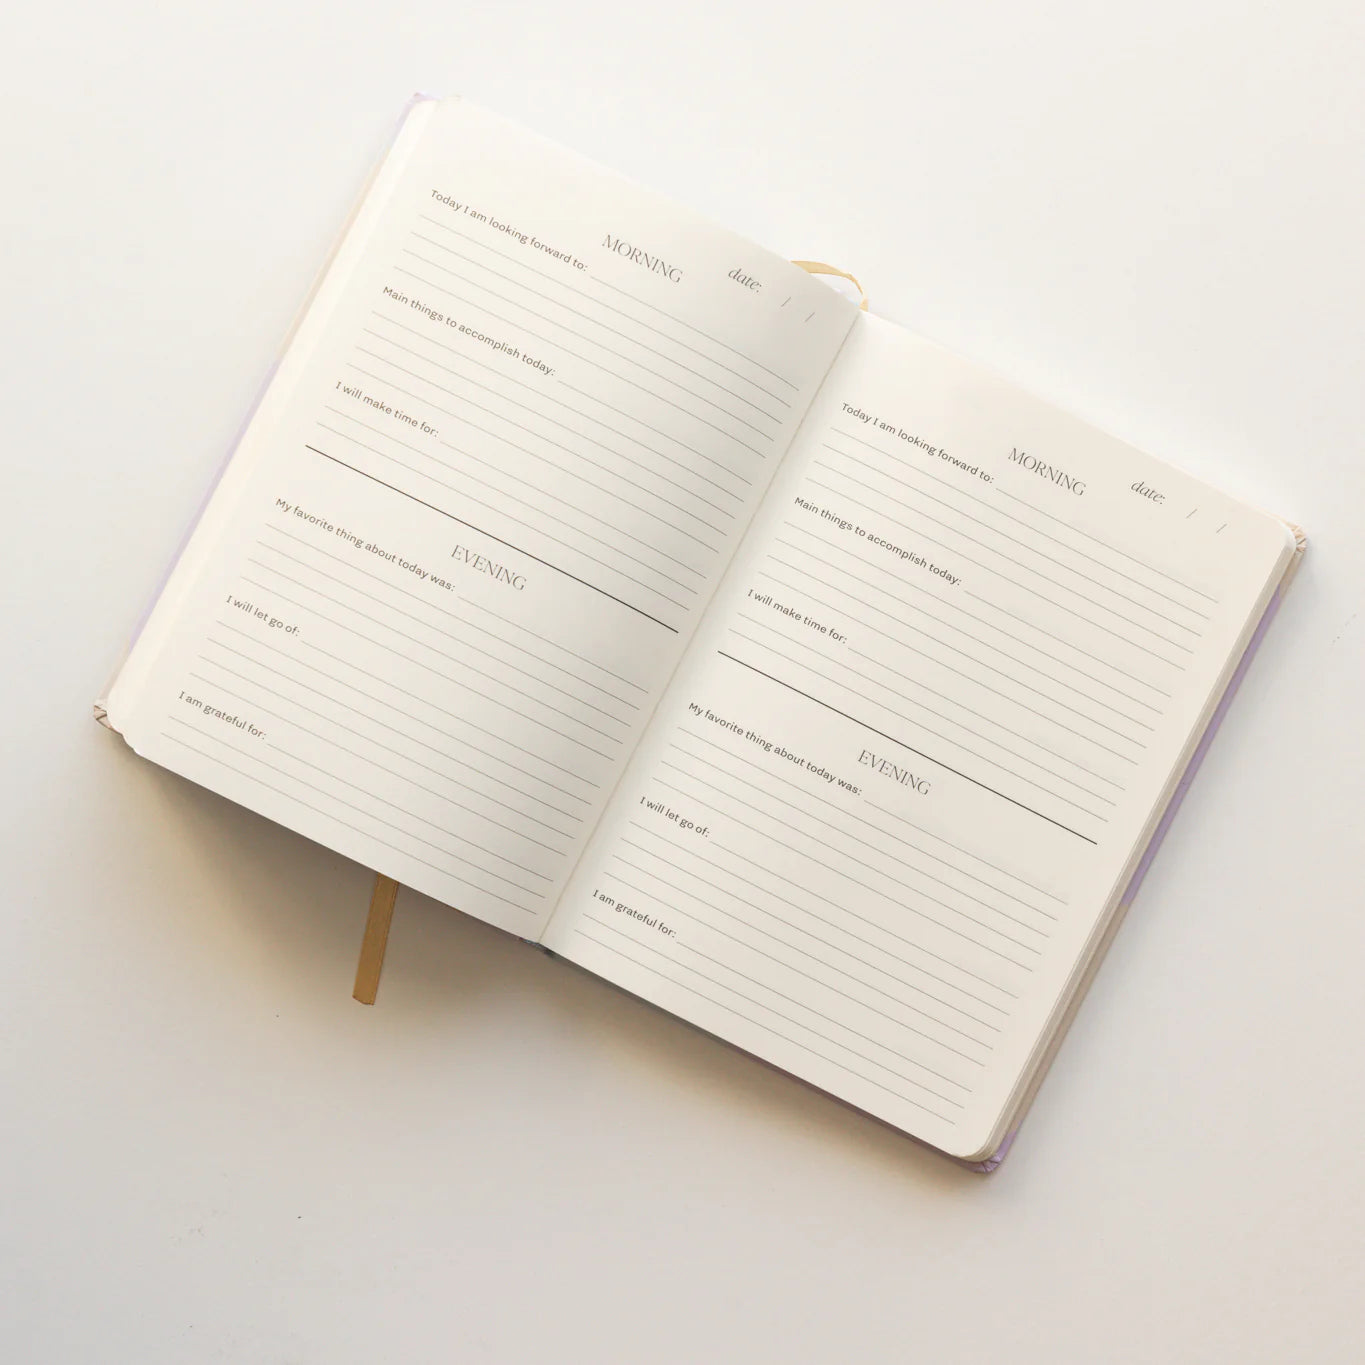 Be Mindful Journal: A Daily Five Minute Journal